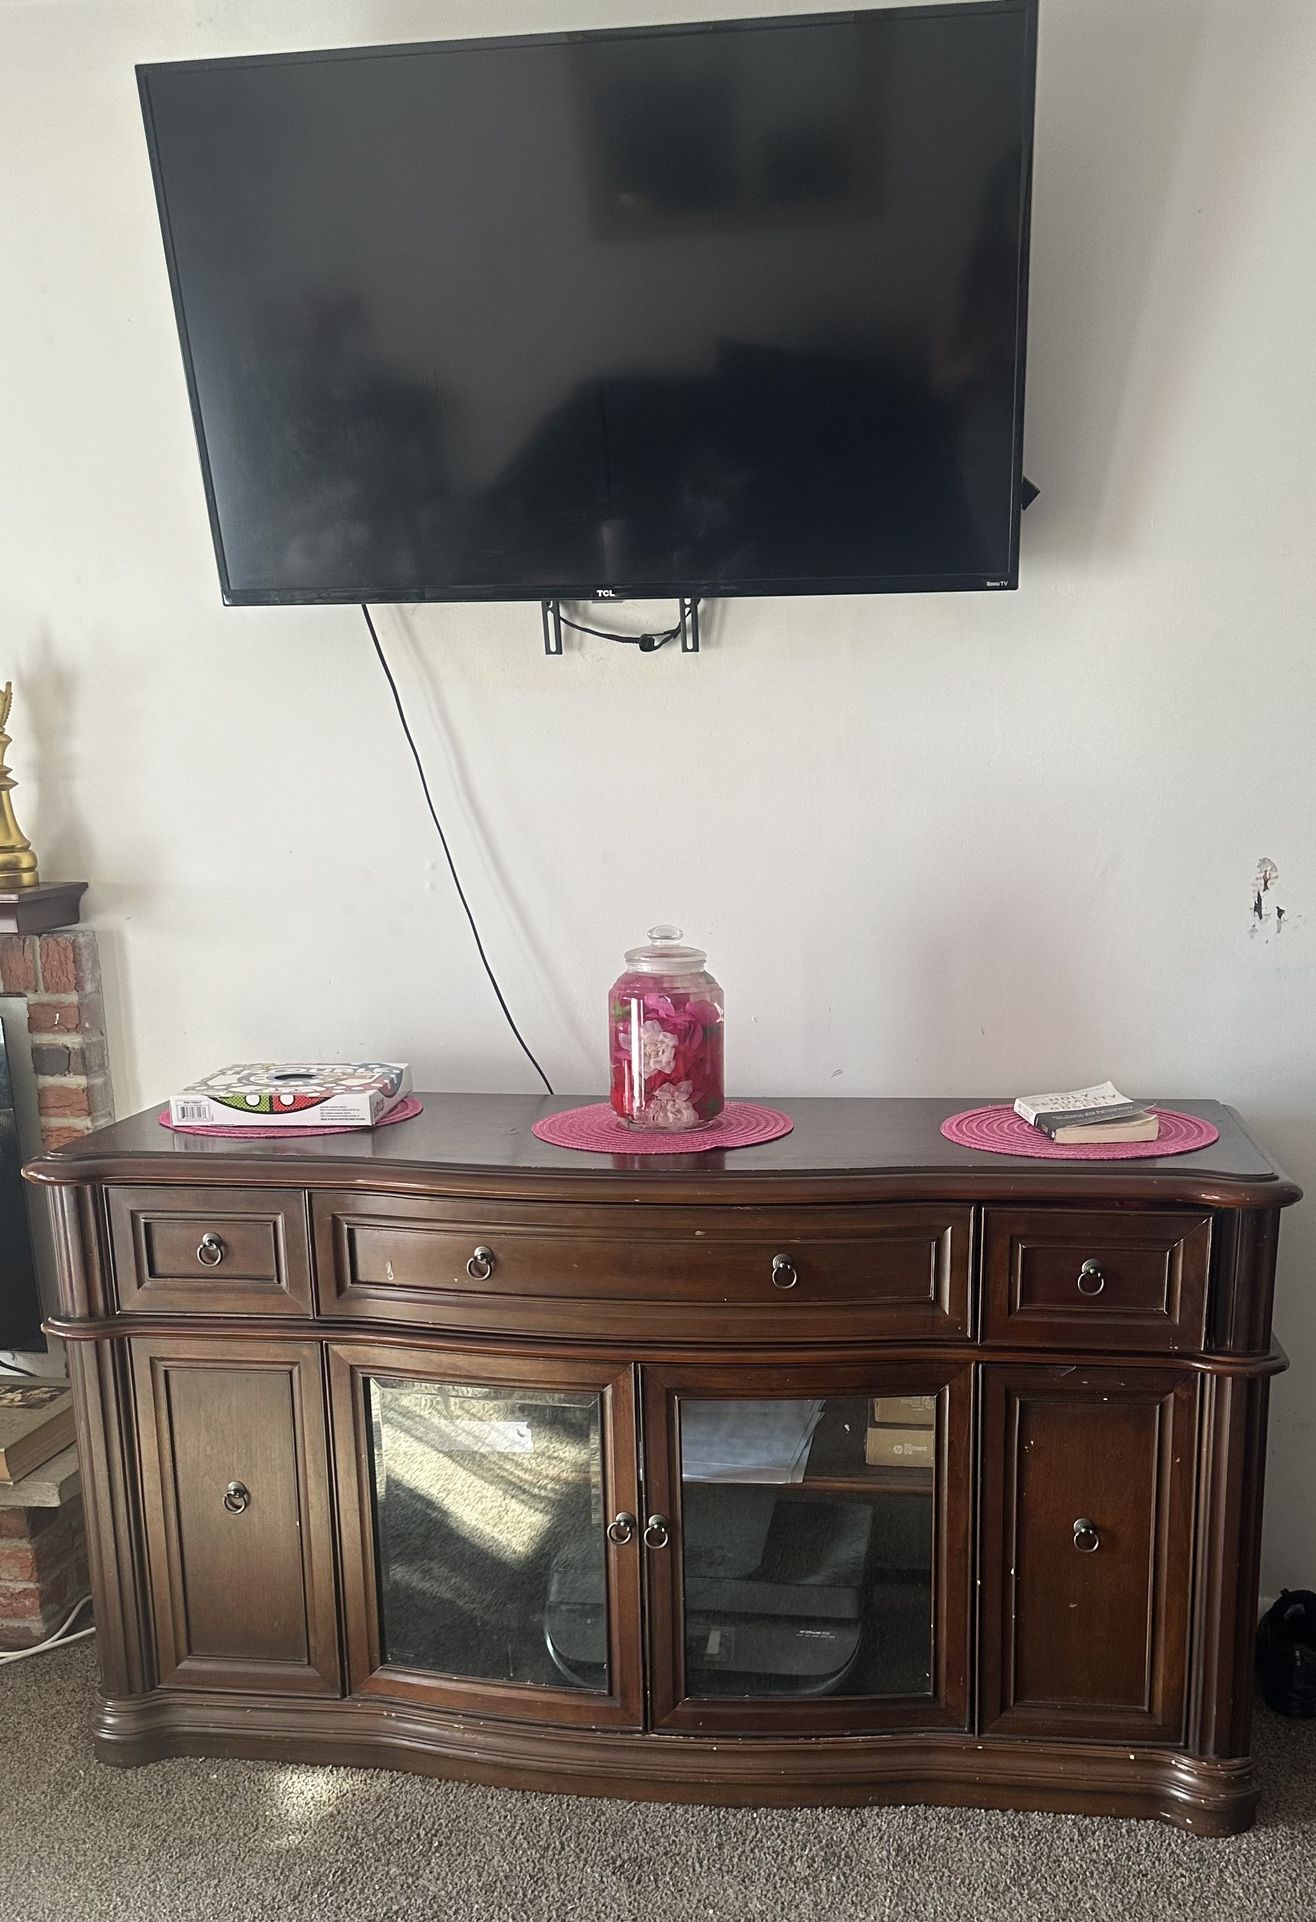 55” Tv And Tv Stand Can Be Sold Separate 